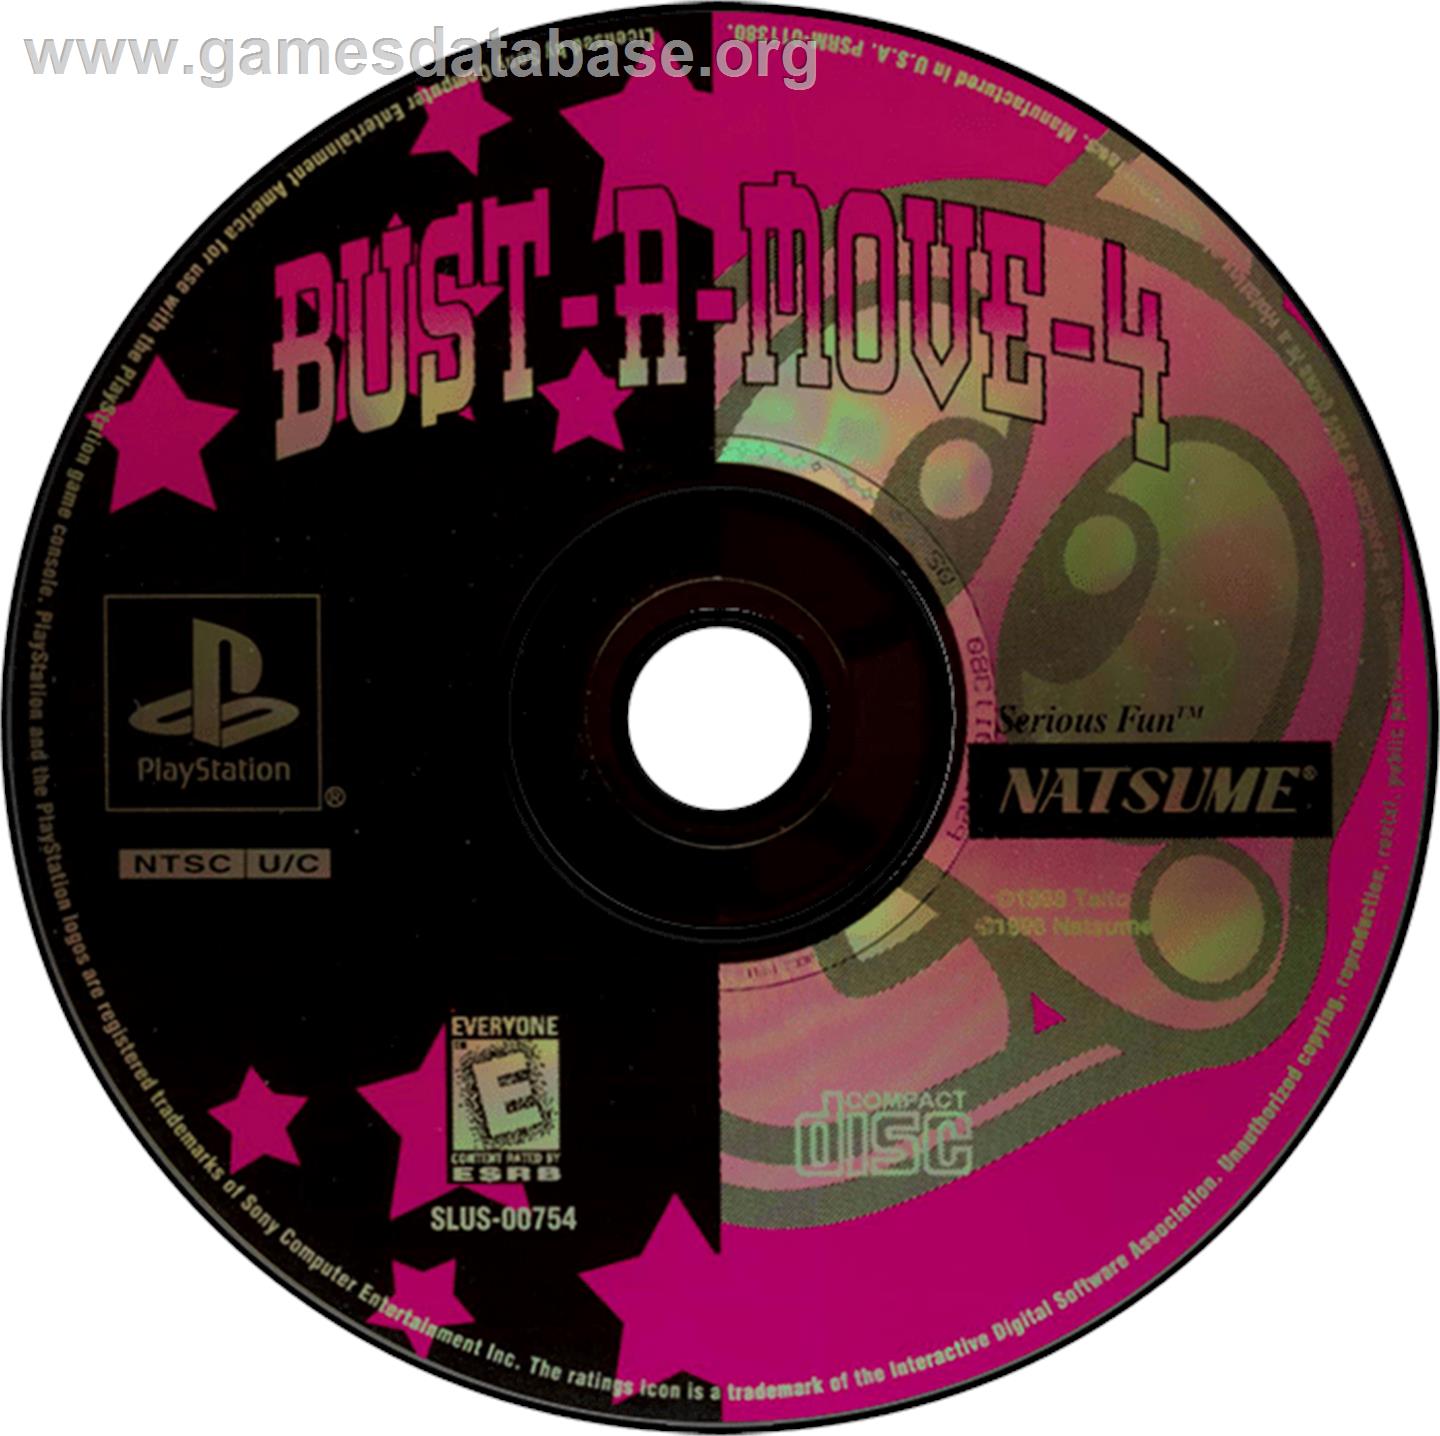 Bust-A-Move 4 - Sony Playstation - Artwork - Disc